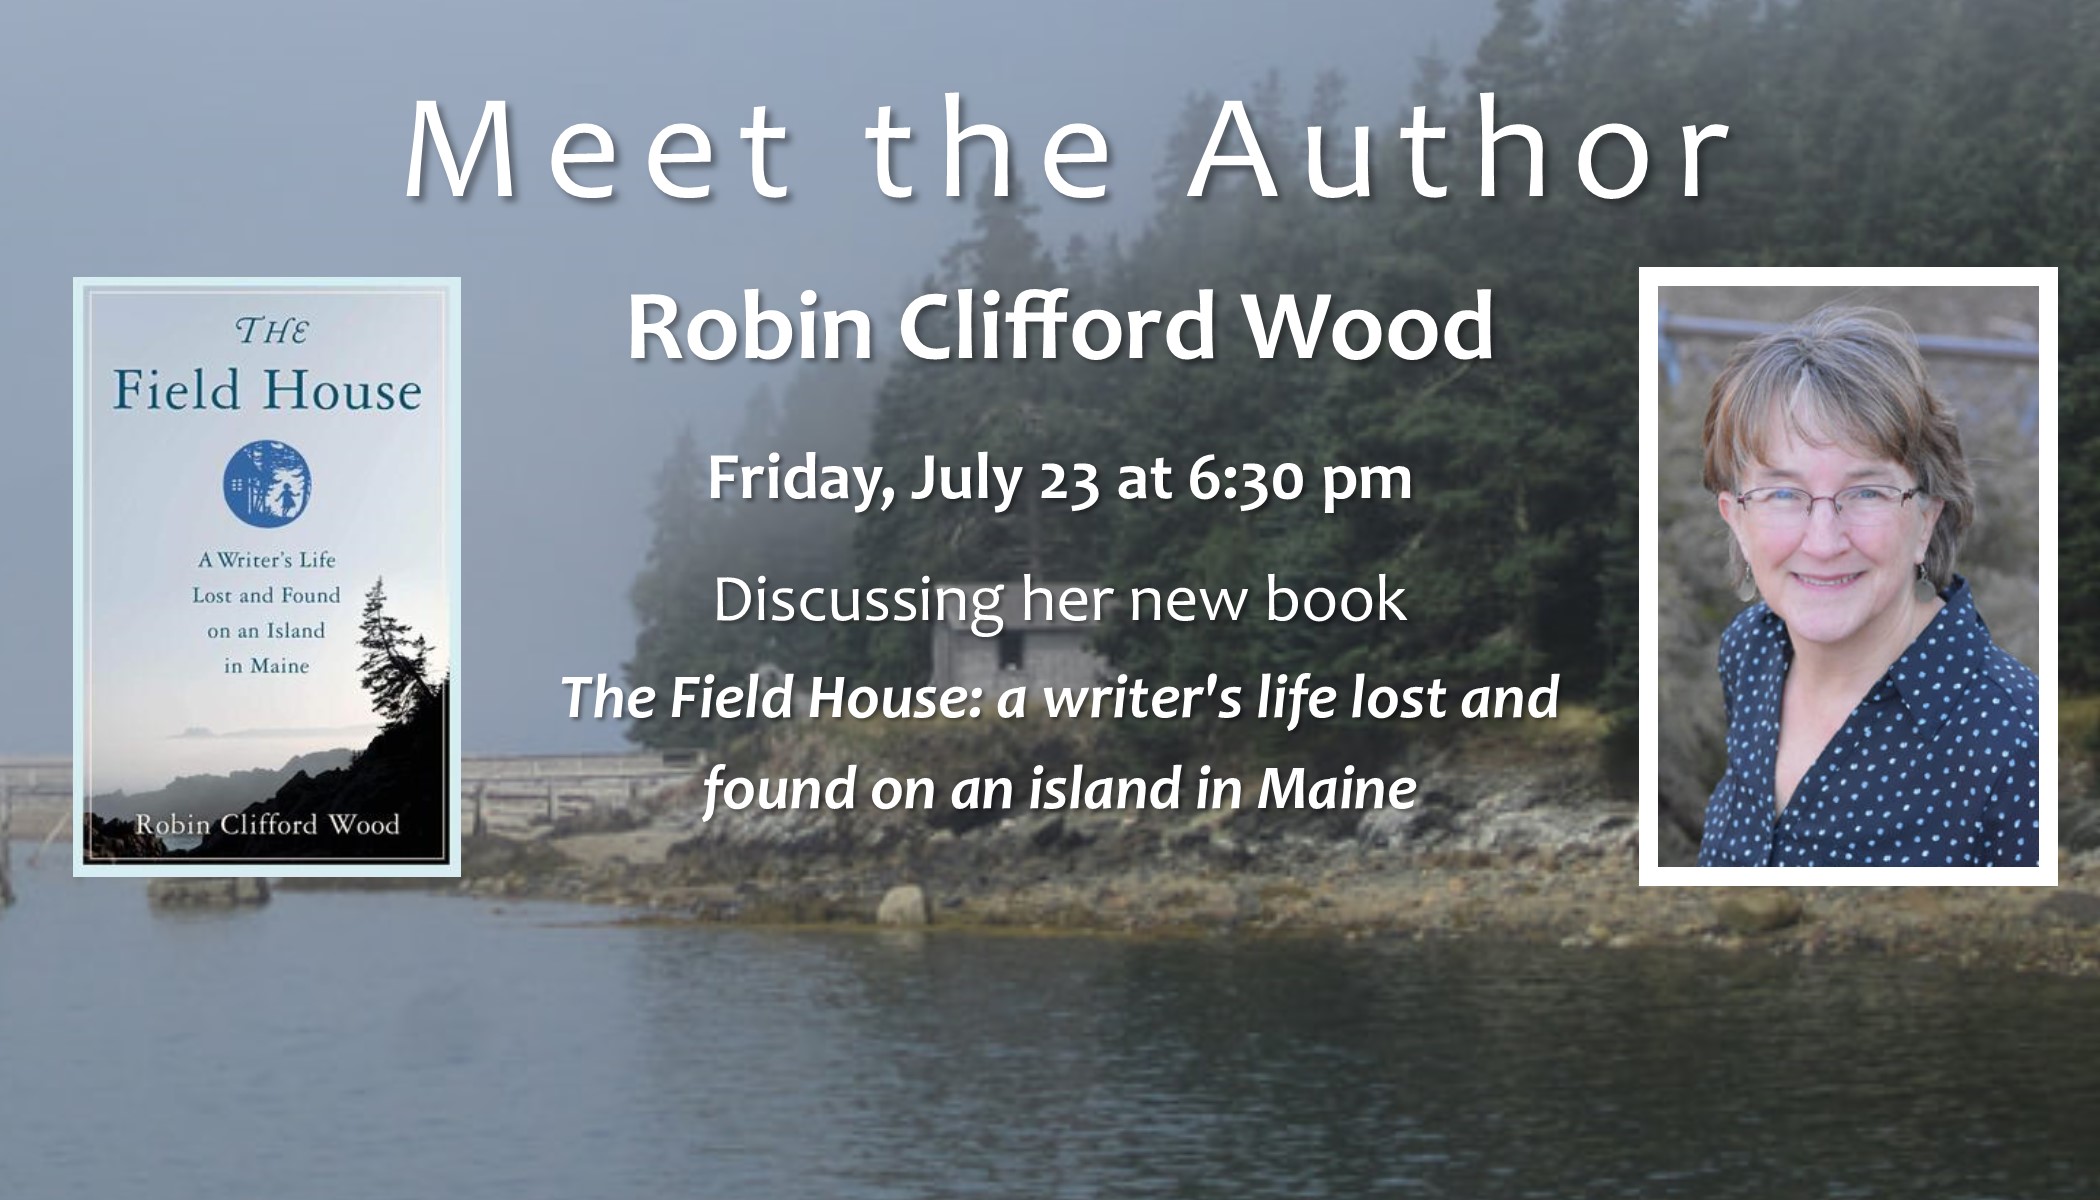 Meet the Author Robin Clifford Wood 7/23 at 6:30 pm